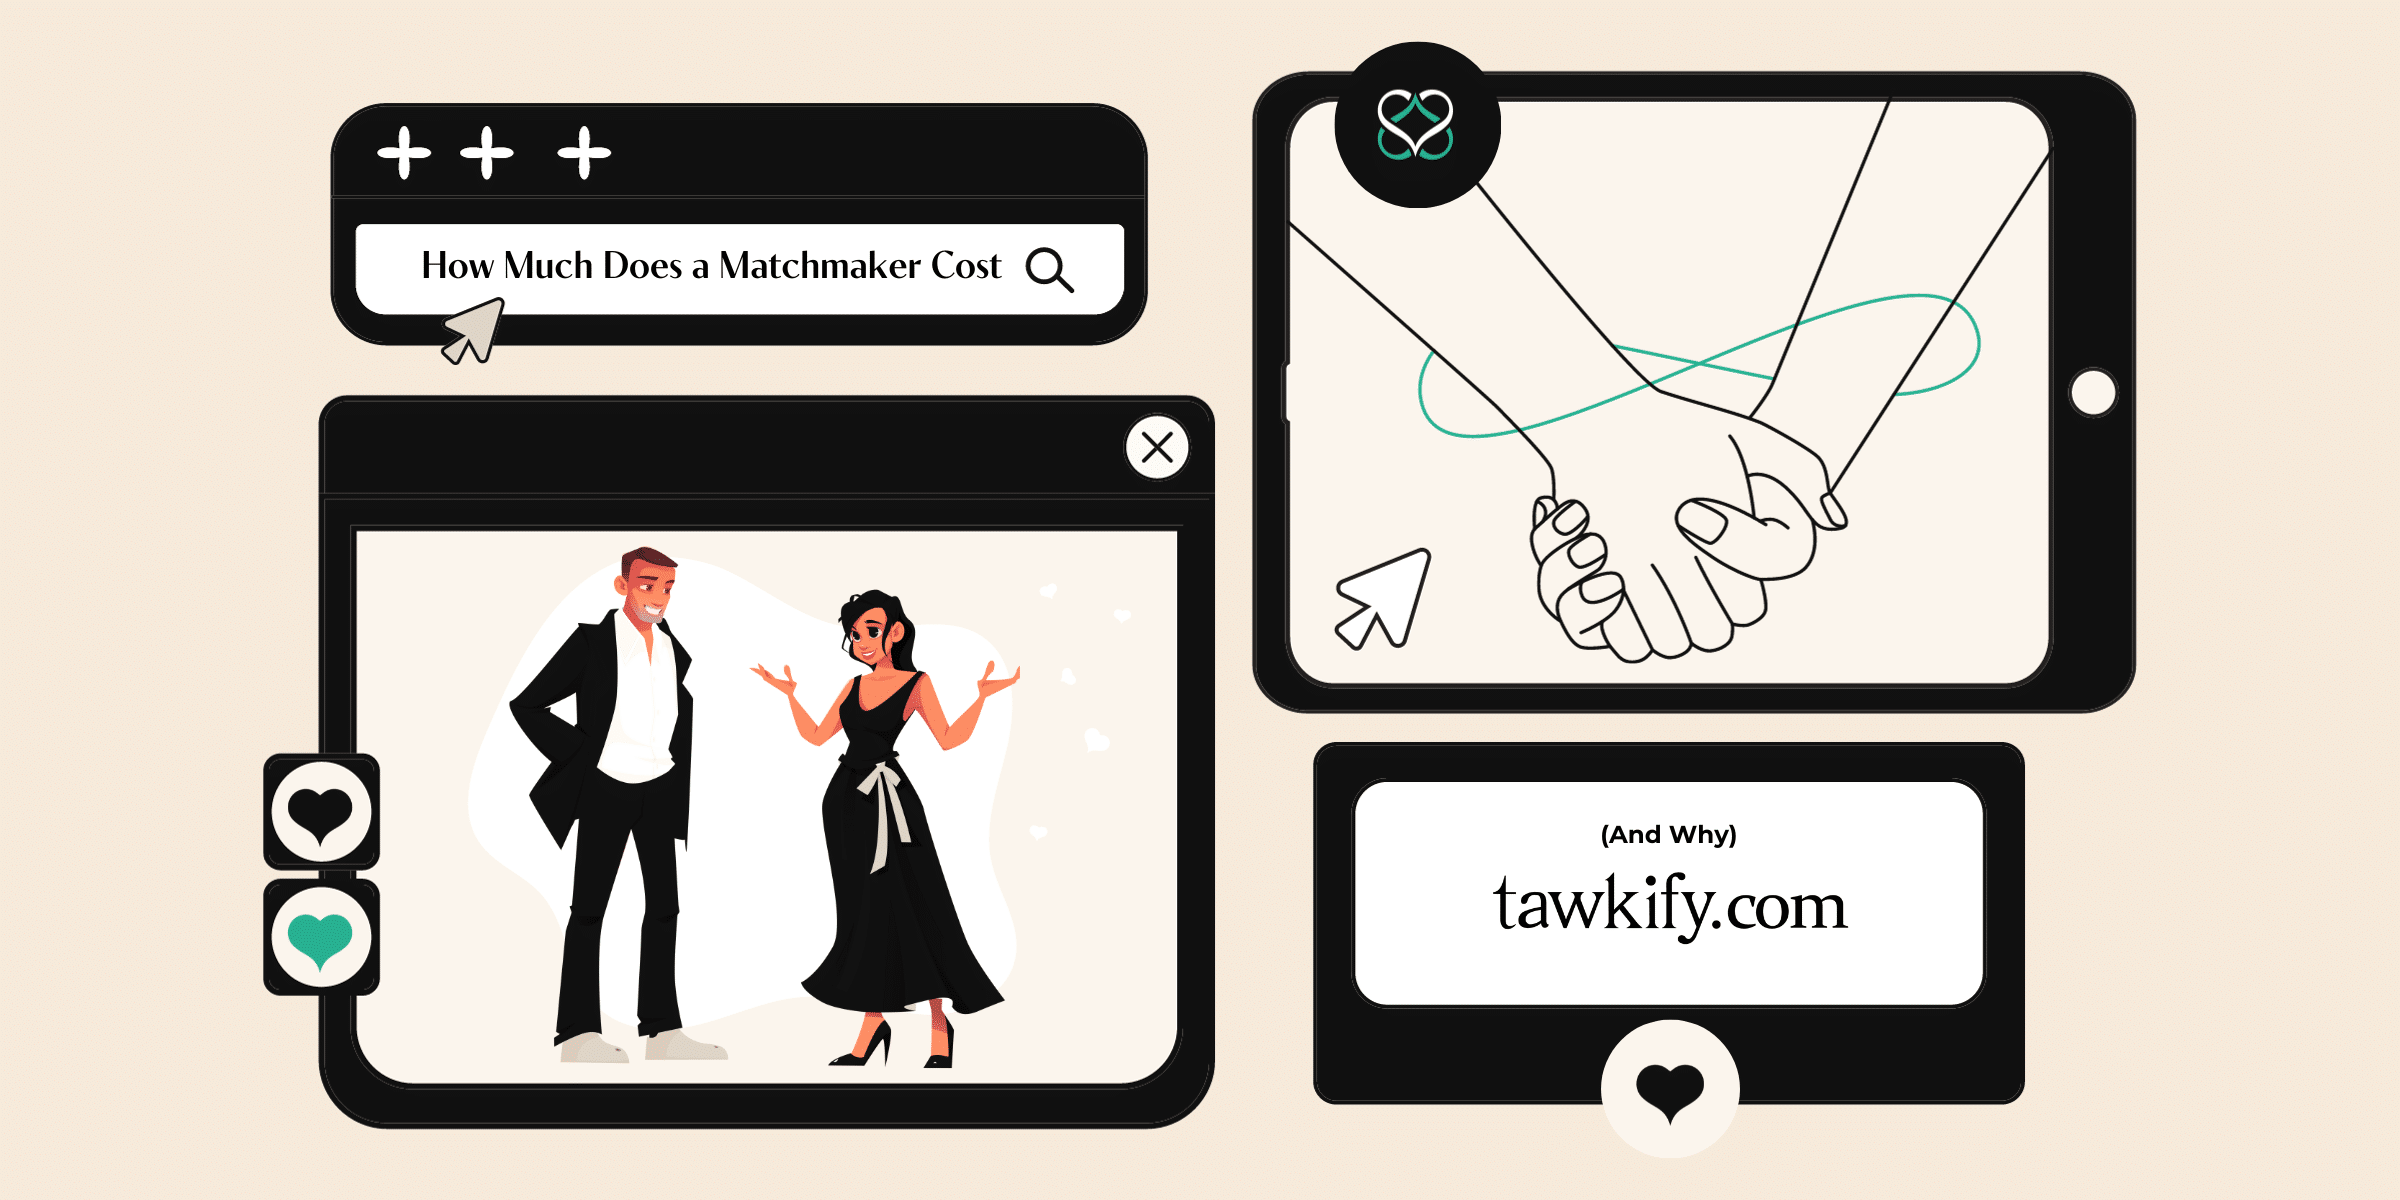 Discover the ins and outs of matchmaking fees in 2024 with our detailed guide. Learn what factors influence the cost, compare matchmaking to online dating, and explore Tawkify's unique approach. Understand if investing in a matchmaker is the right choice for your journey towards love.